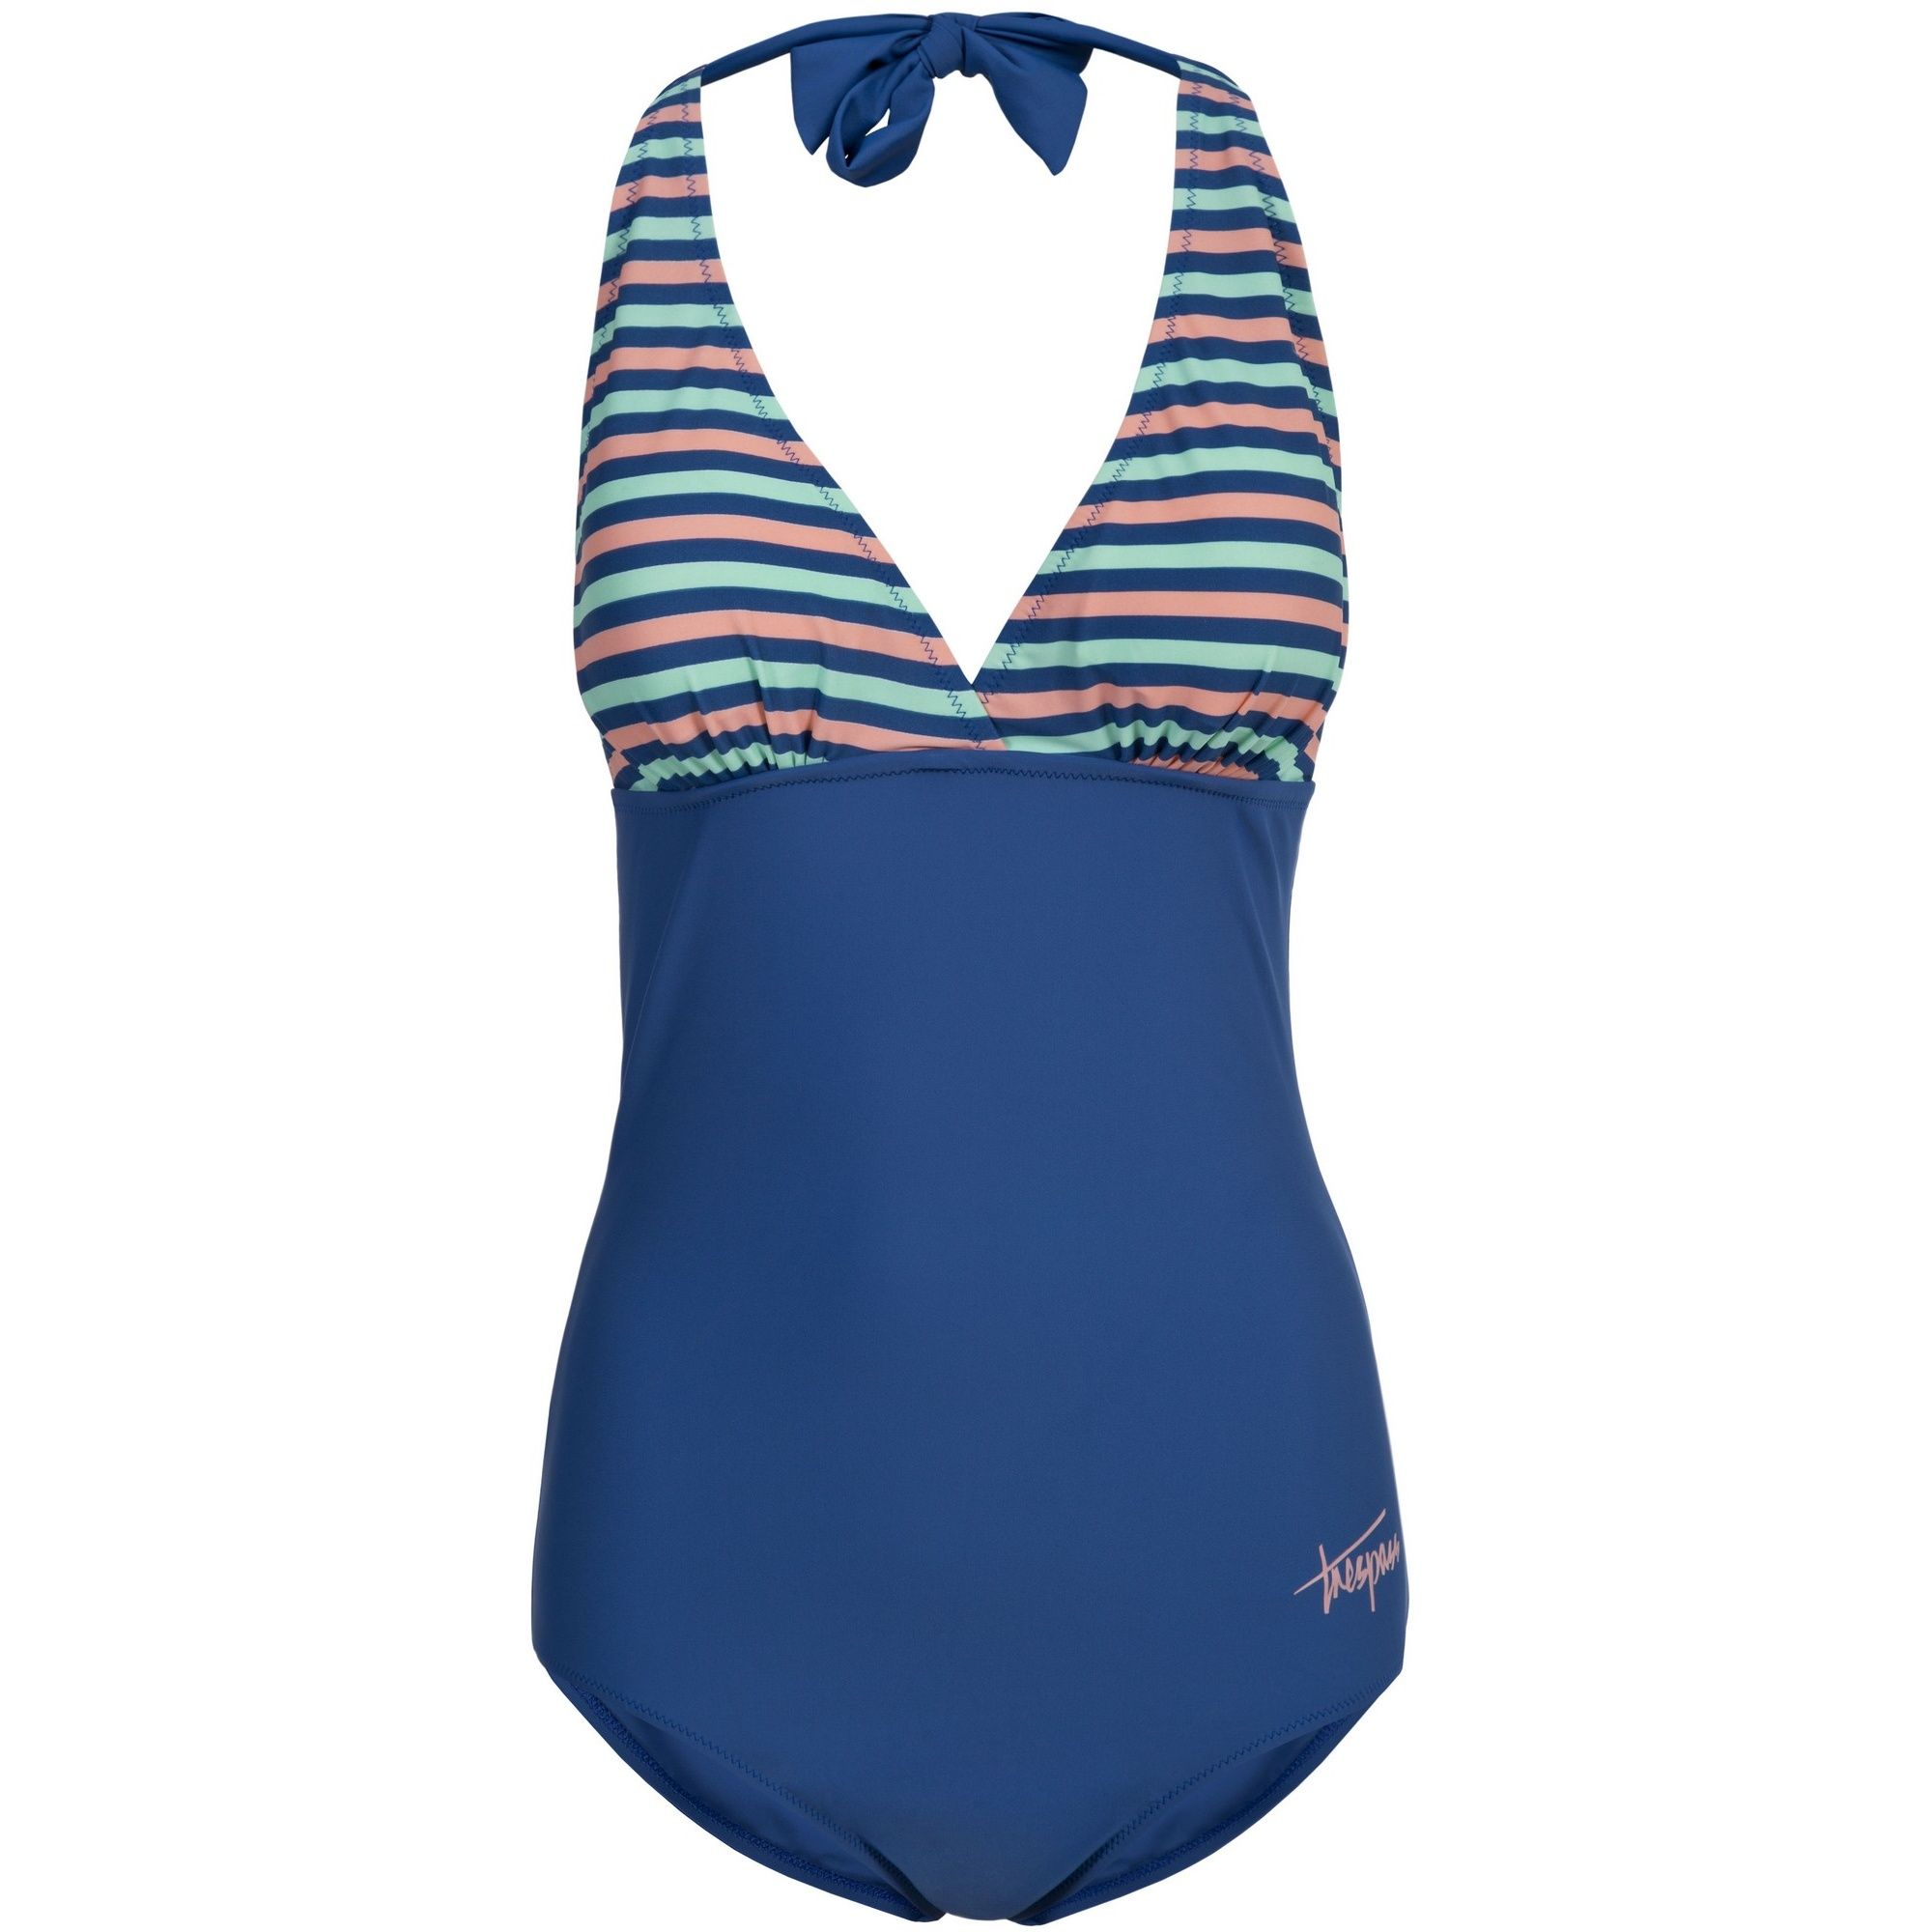 Swimsuit. Halter Neck. Removable Bust Pads. Lined Gusset. 80% Polyamide/20% Elastane. Trespass Womens Chest Sizing (approx): XS/8 - 32in/81cm, S/10 - 34in/86cm, M/12 - 36in/91.4cm, L/14 - 38in/96.5cm, XL/16 - 40in/101.5cm, XXL/18 - 42in/106.5cm.